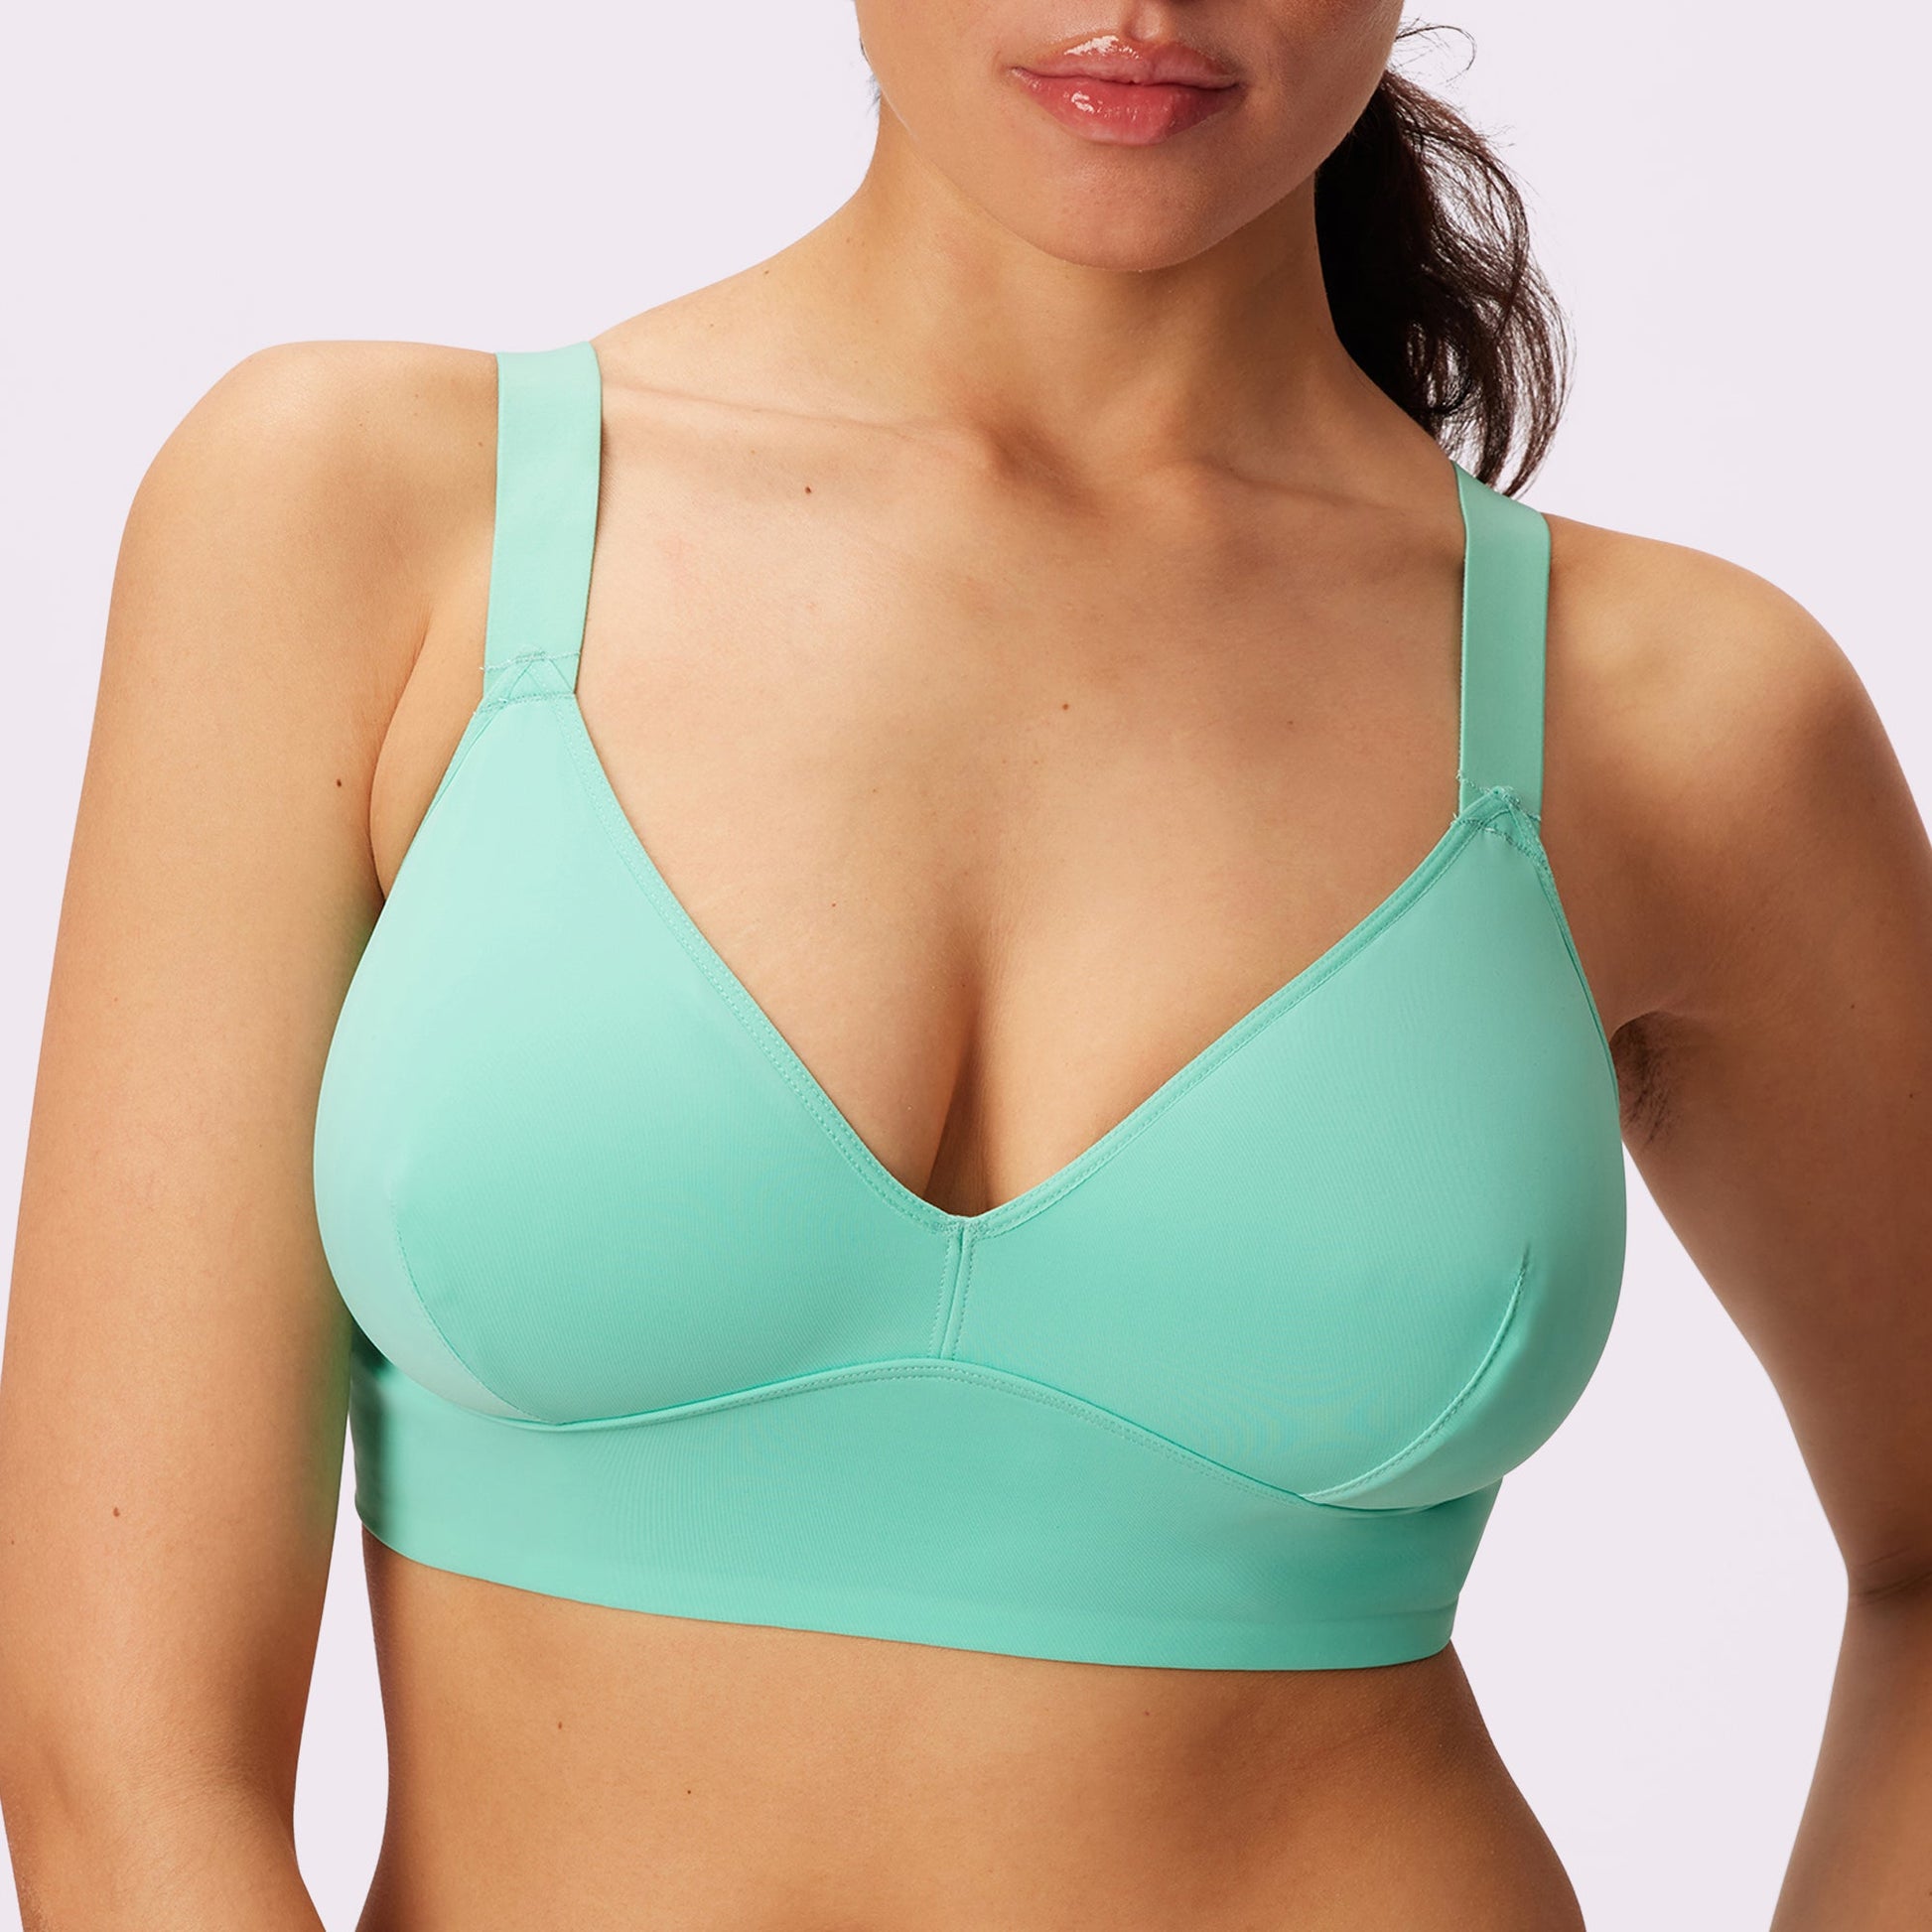 Paramour Women's Altissima Longline Recycled Seamless Bralette : Target